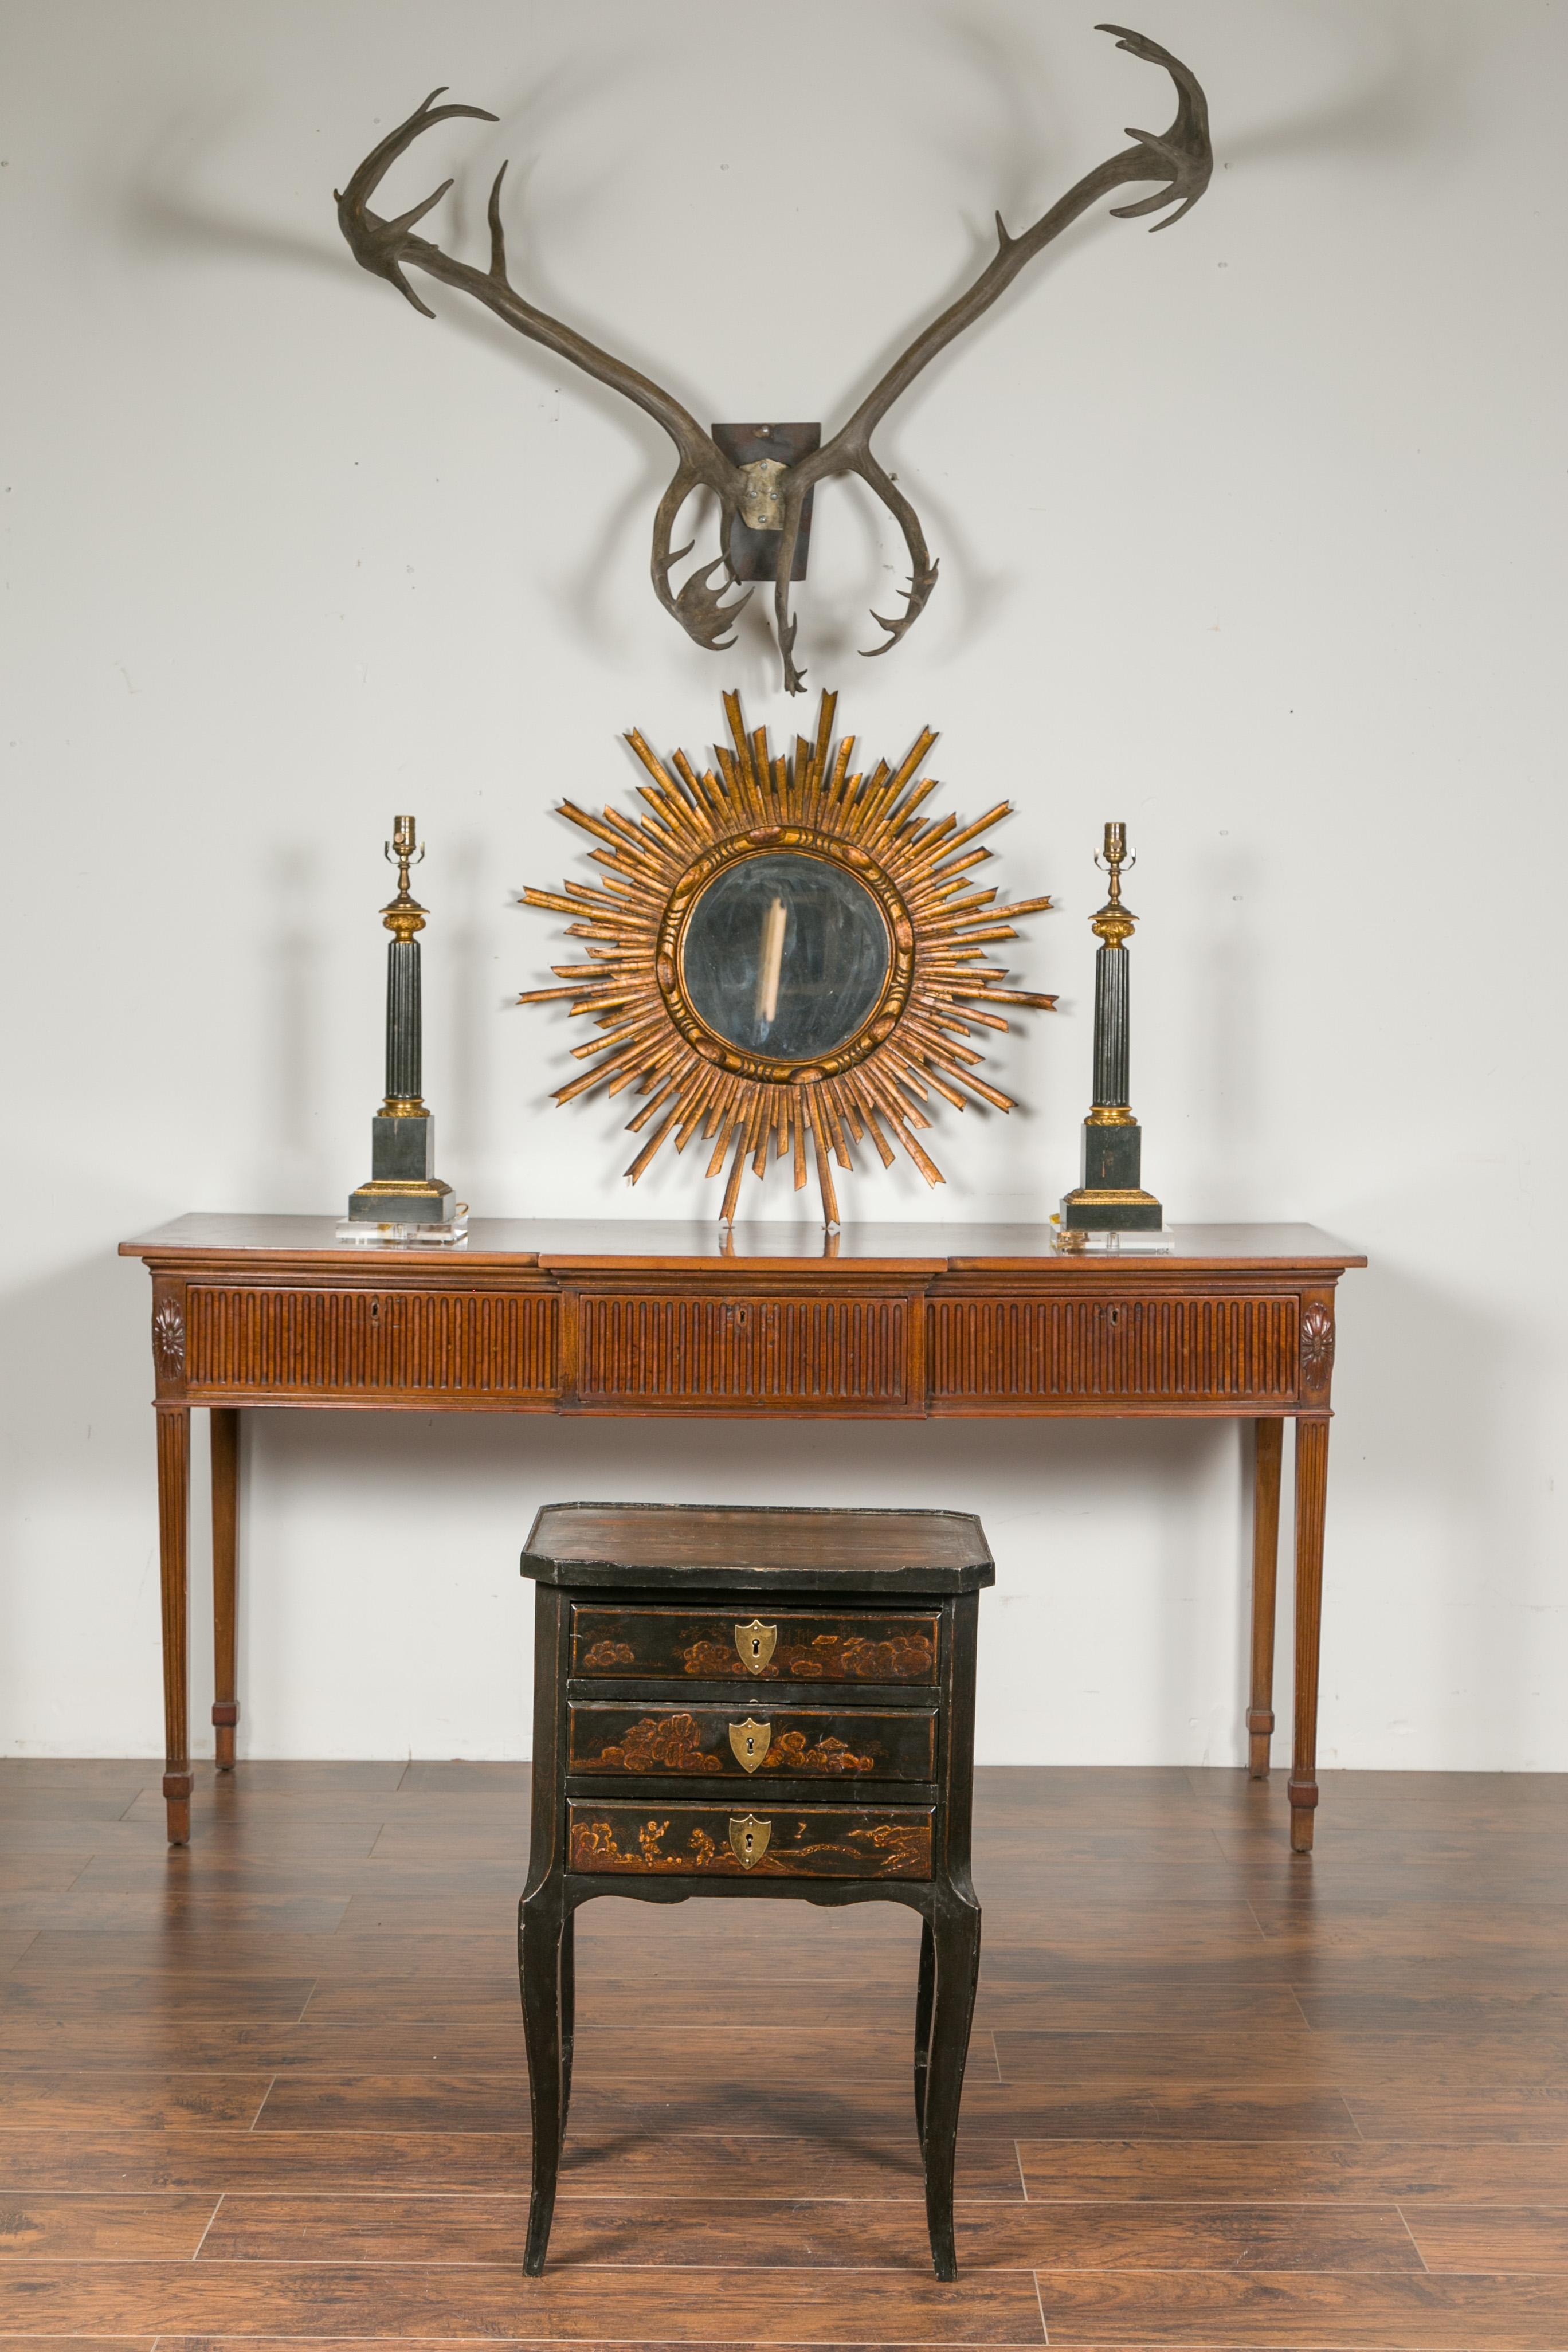 An English black chinoiserie bedside table from the early 20th century, with three drawers and curving legs. Created in England at the turn of the century, this small bedside table feature a rectangular top with slightly raised edges, adorned with a